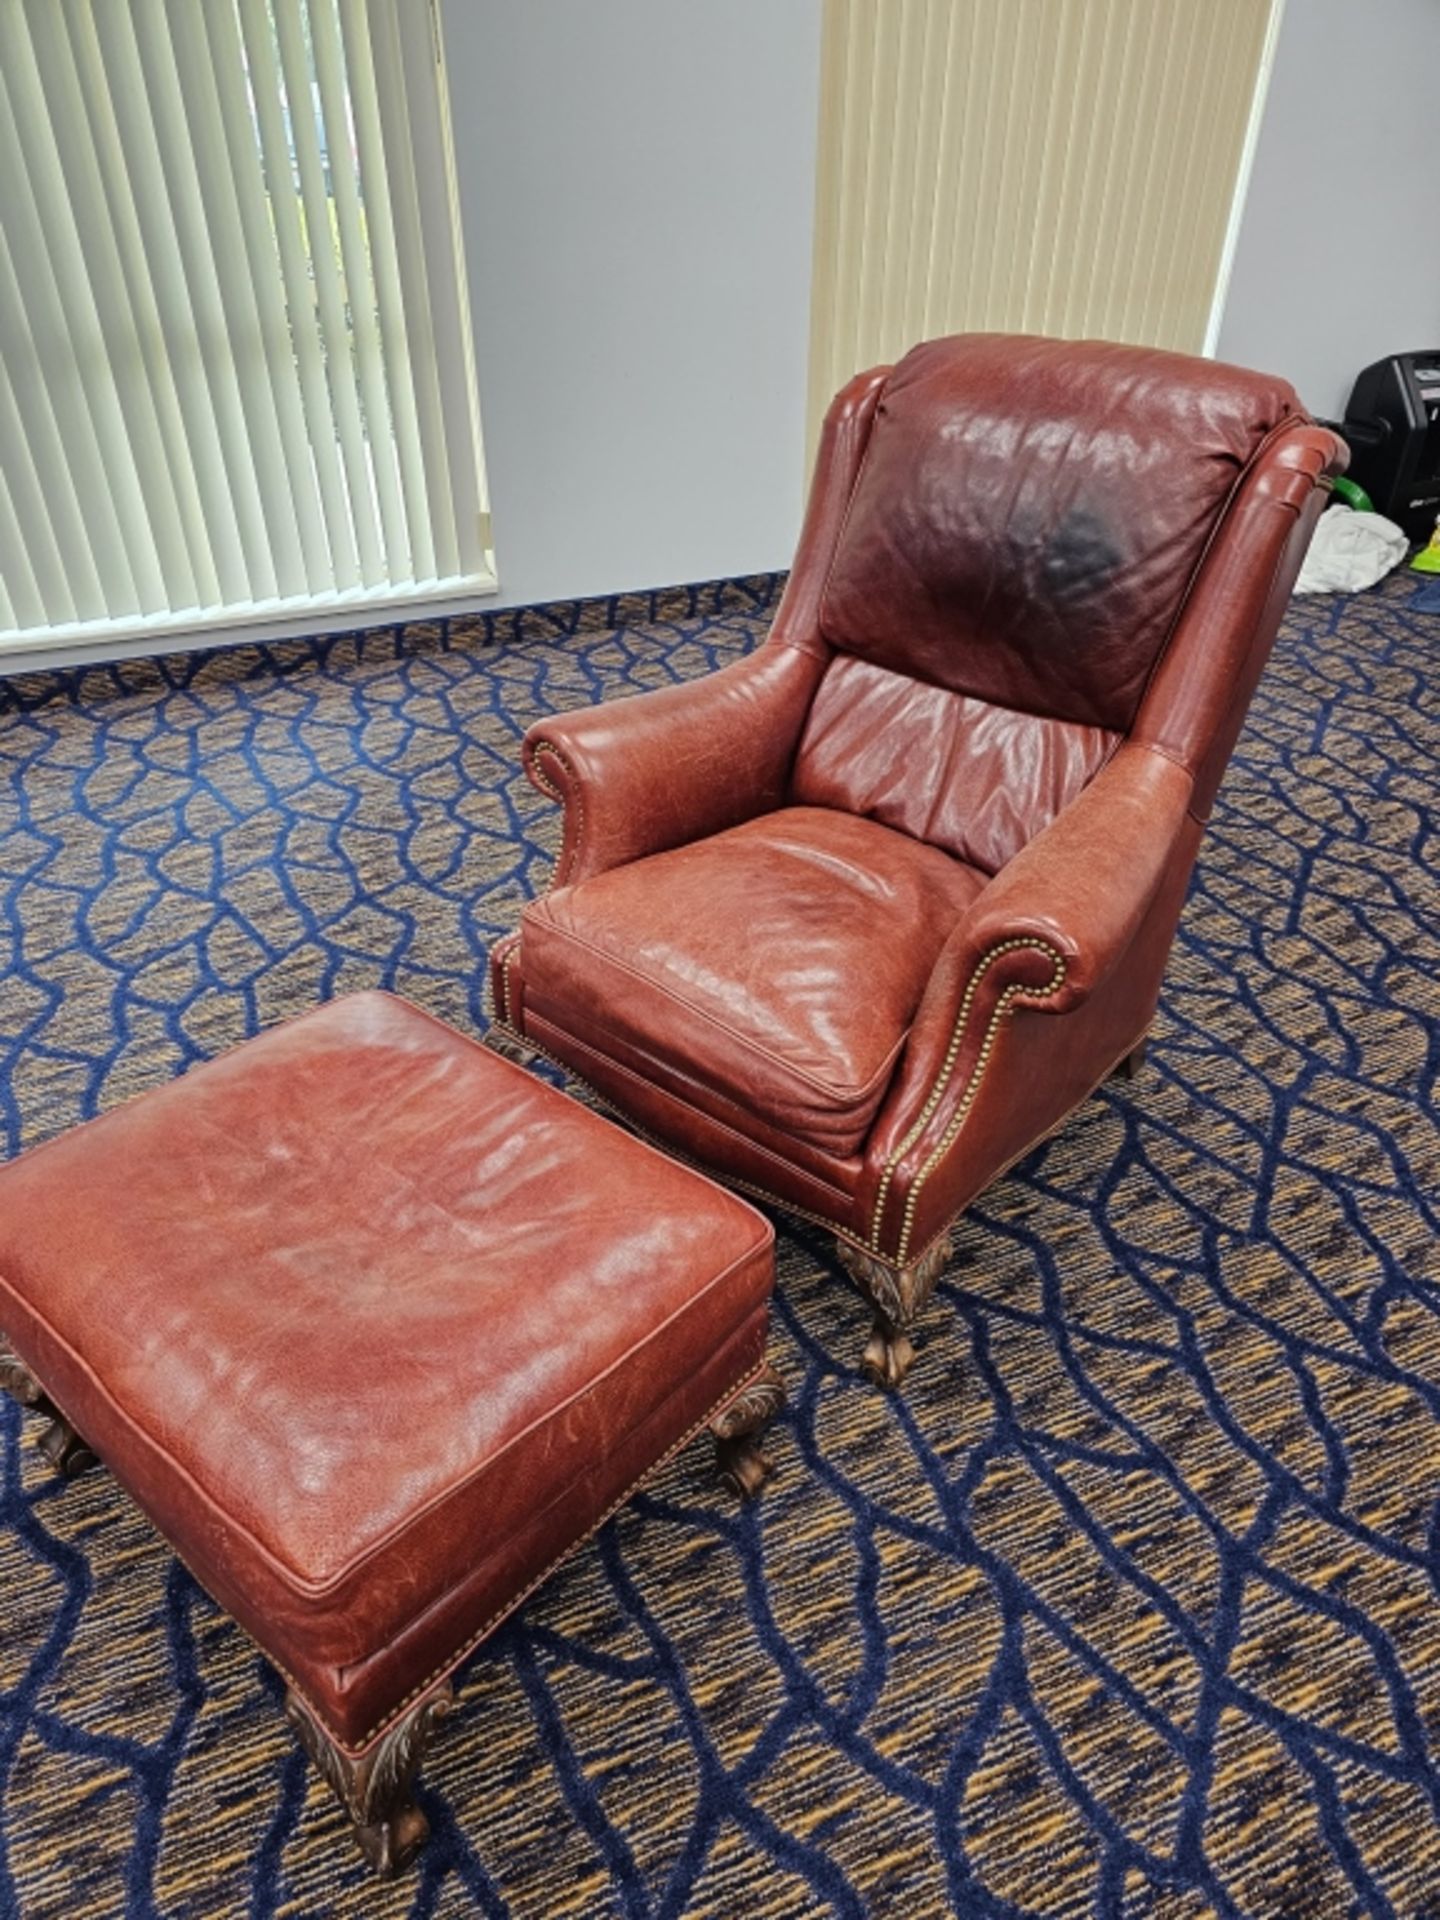 (2) Robb & Stucky Leather Chairs With Foot Stools - Image 10 of 11